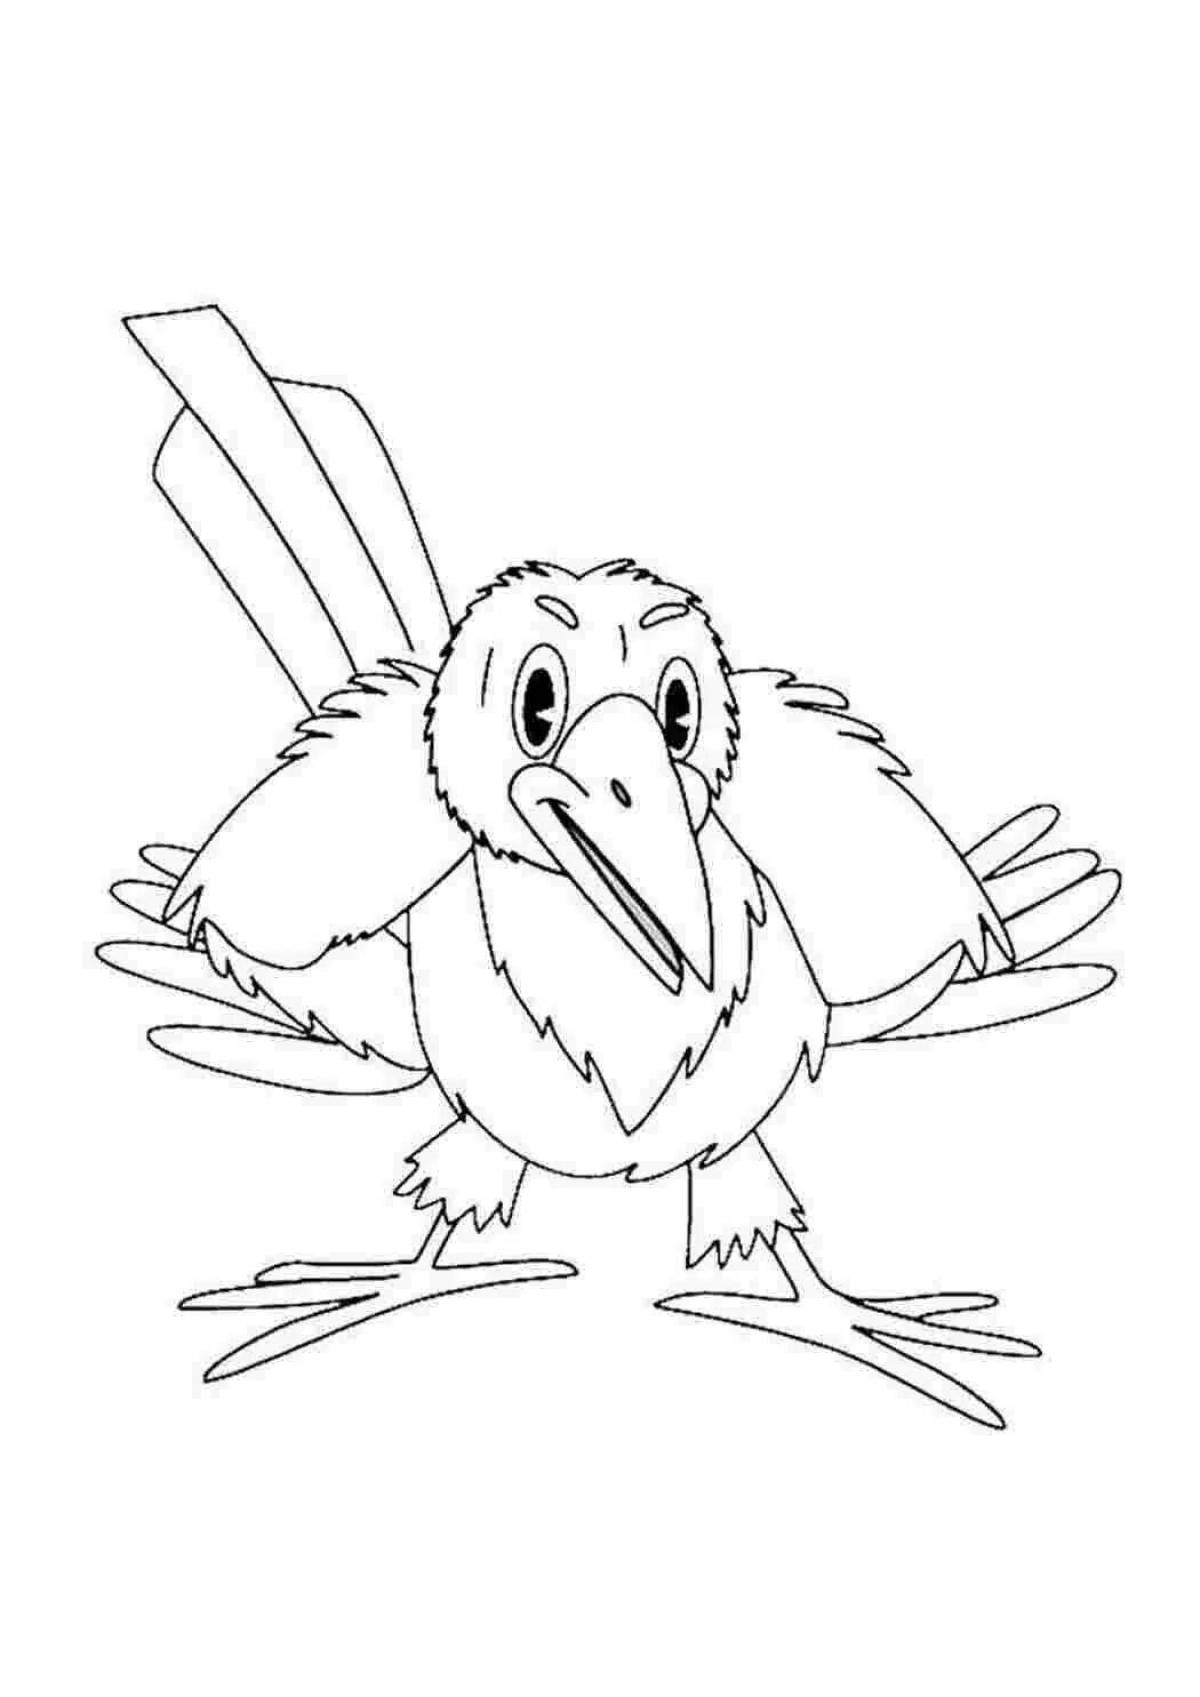 Coloring page stylish crow